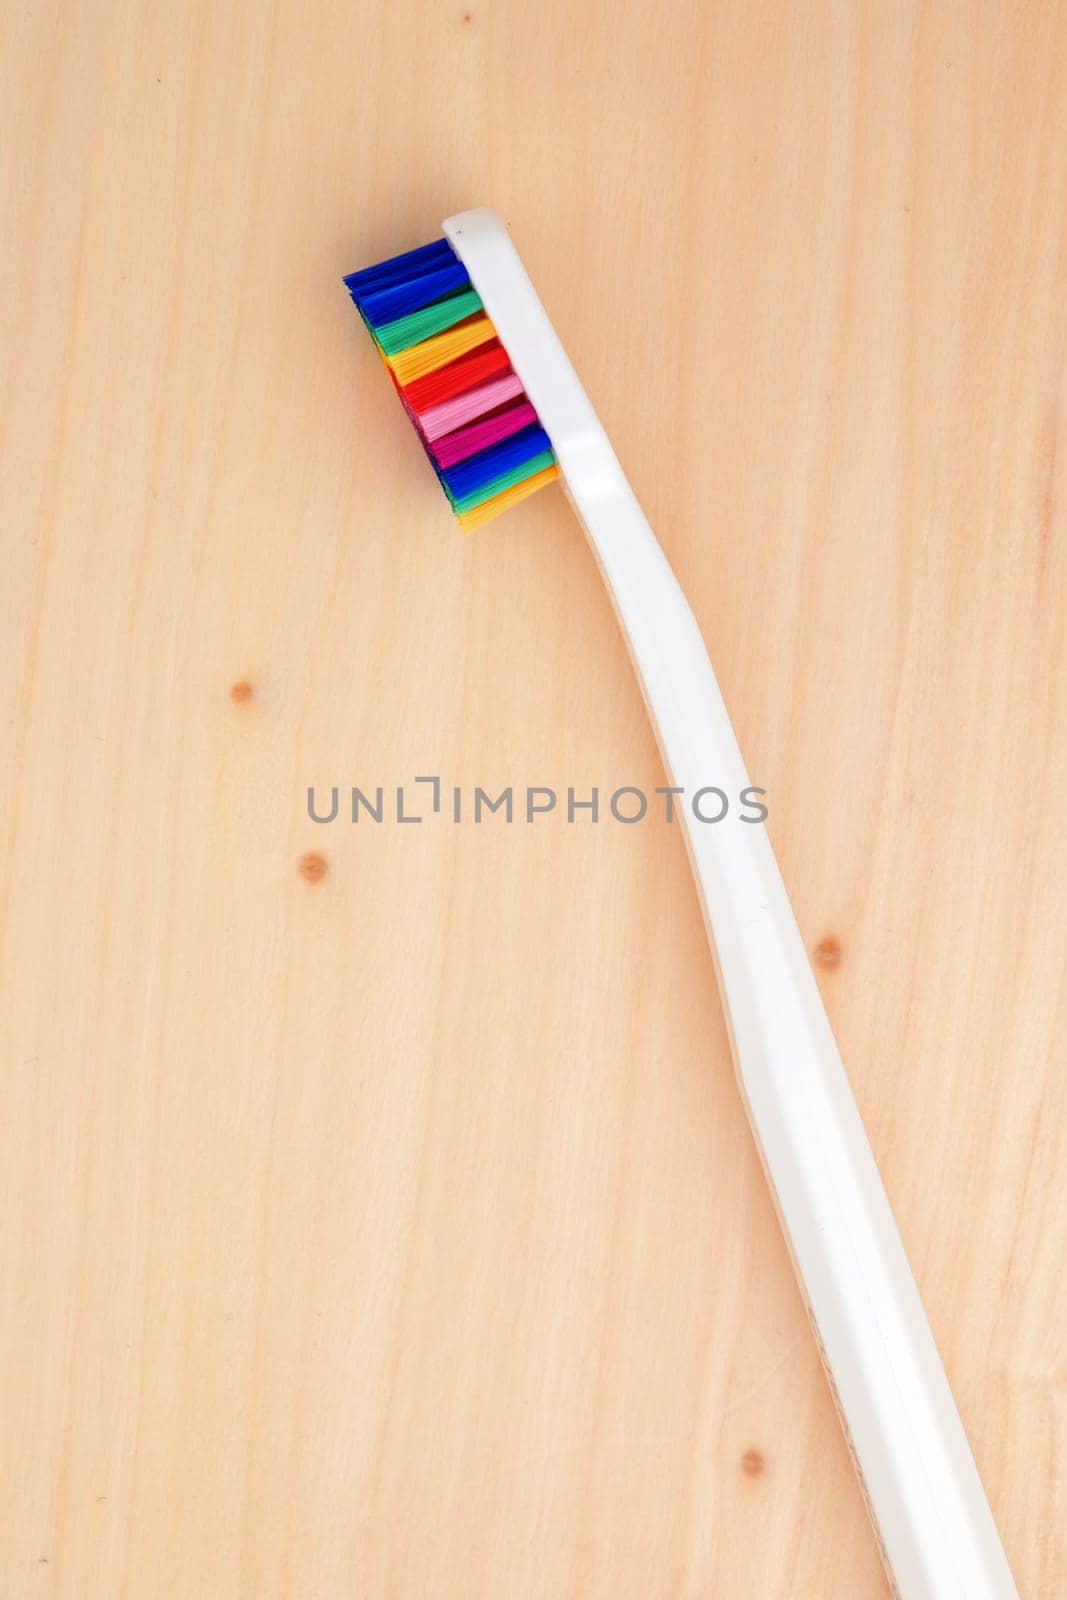 White toothbrush with multicolored bristles on a wooden table. Bristles in all colors of the rainbow. Rainbow toothbrush with white knob. Fashionable oral care by EvgeniyQW